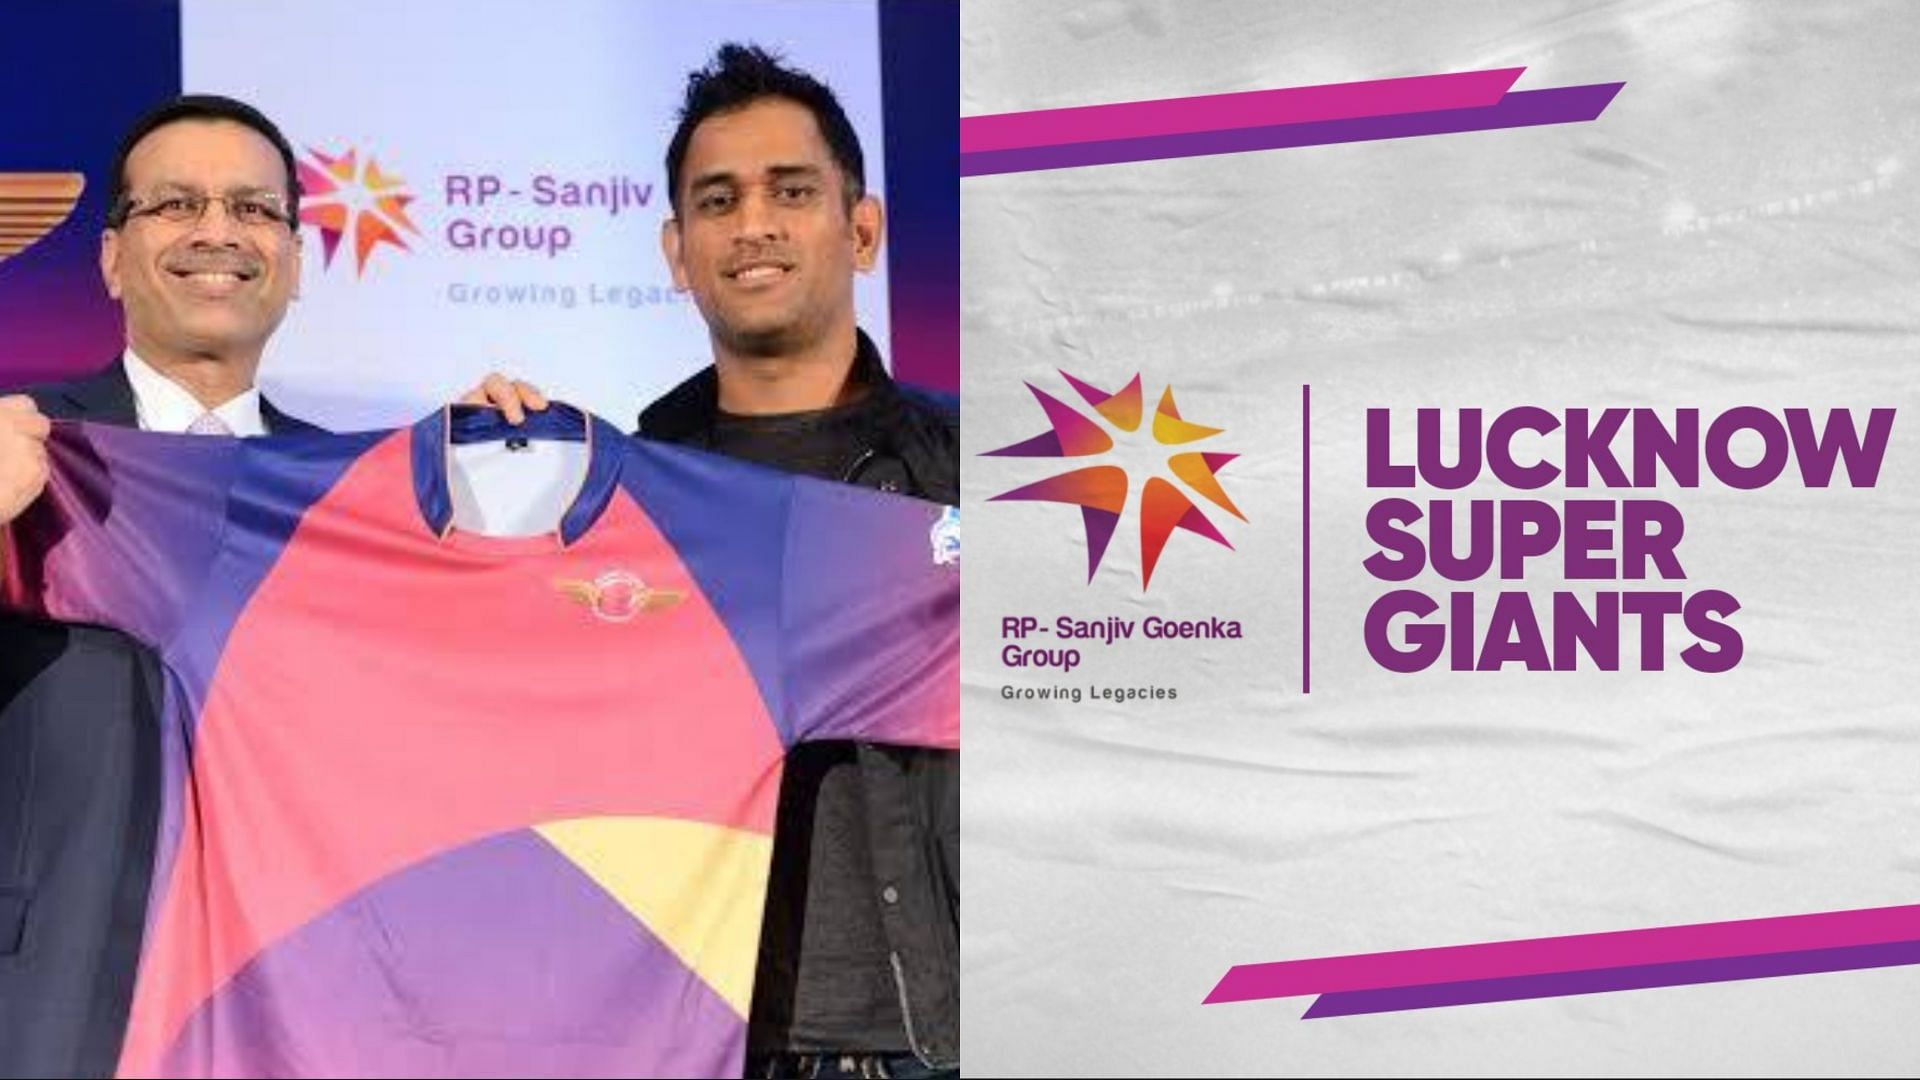 Current Chennai Super Kings captain MS Dhoni played for Rising Pune Supergiants in 2016 and 2017